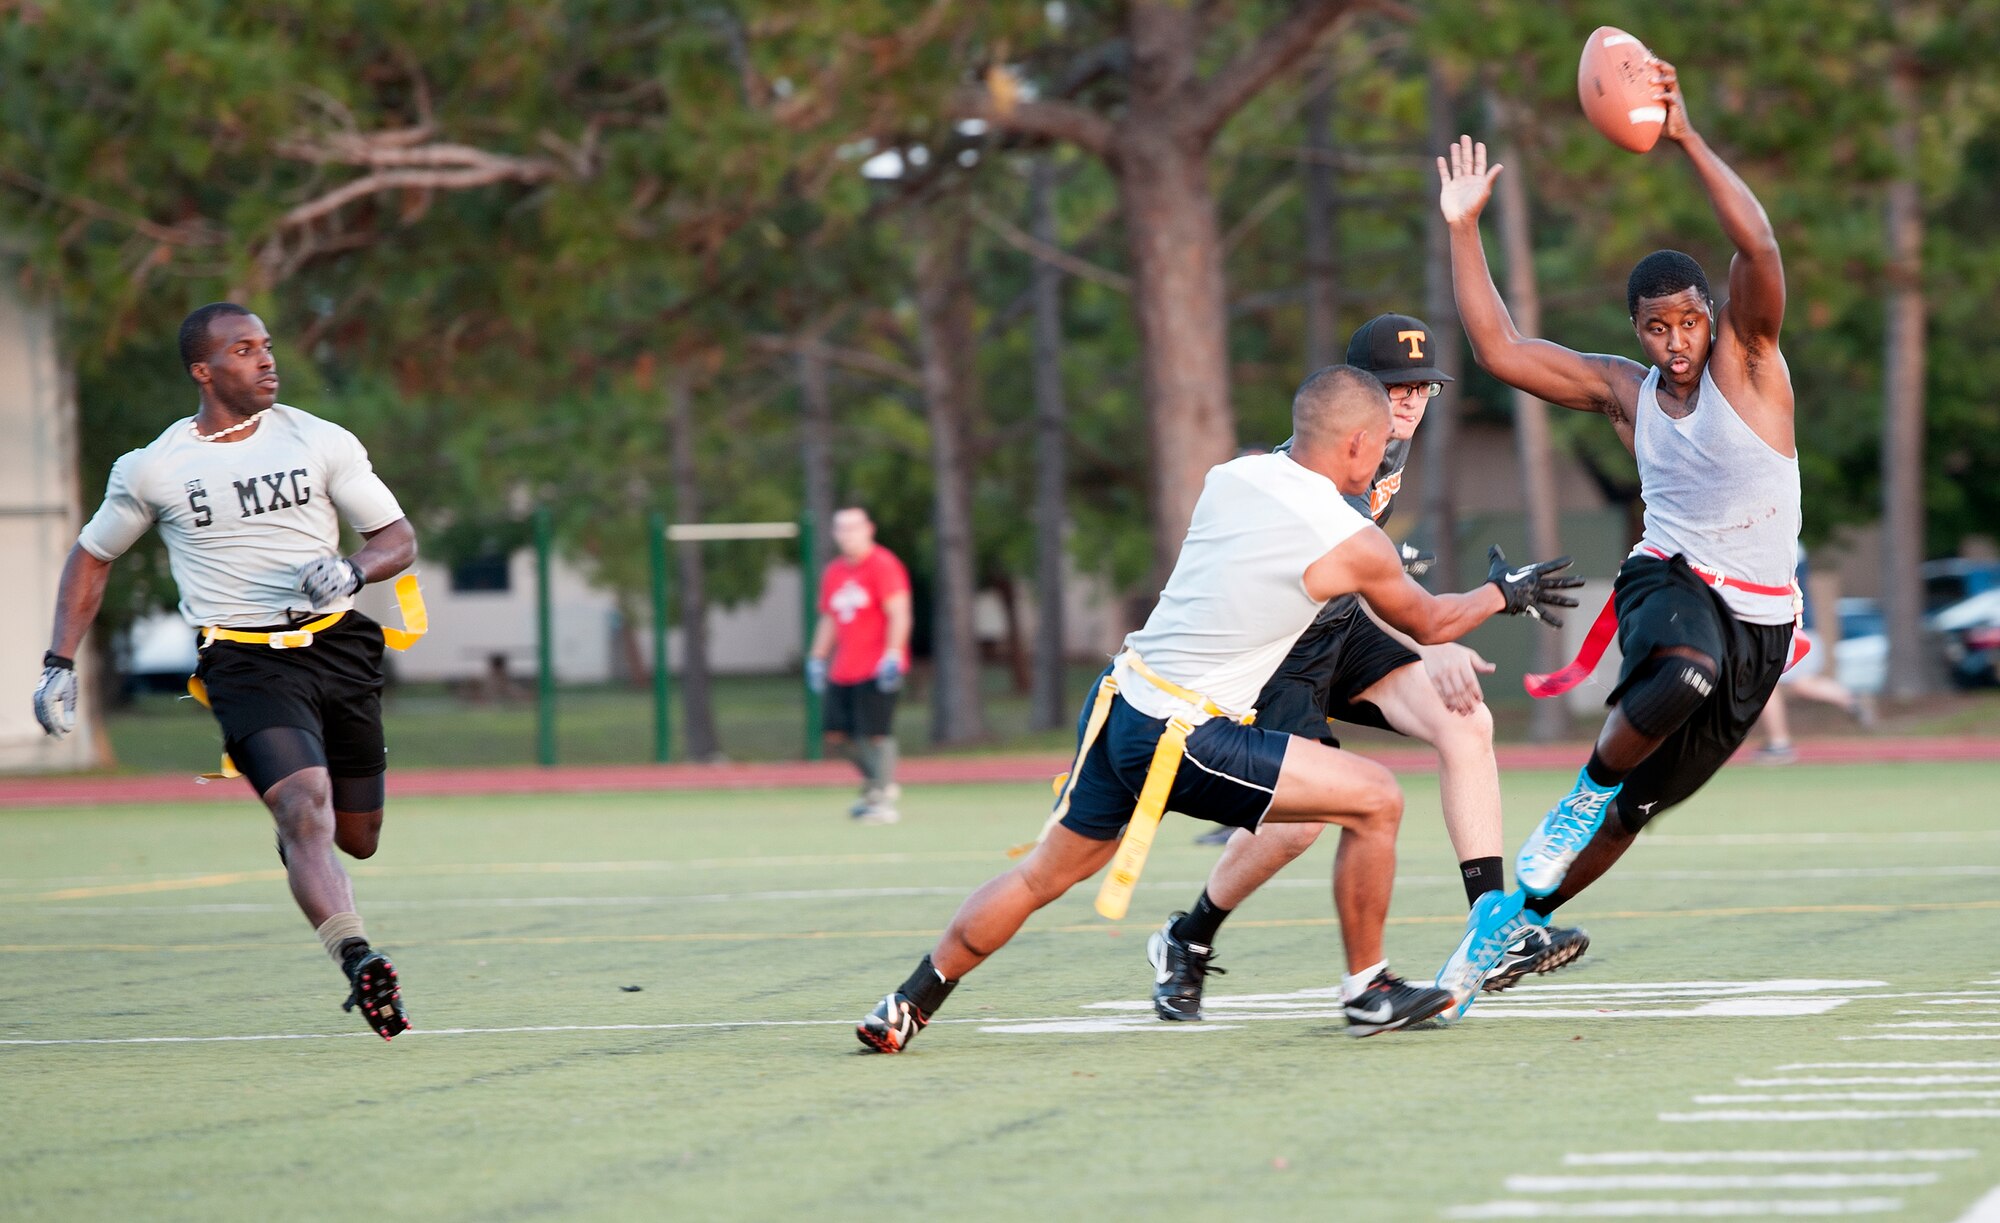 Derrick Raley, 1st Special Operations Force Support Squadron quarterback, attempts to dodge defensive linemen during an intramural flag football game on Hurlburt Field, Fla., Oct. 21, 2014. The 1st SOFSS team finished as a finalist in the 2013 Flag Football Tournament. (U.S. Air Force photo/Senior Airman Kentavist P. Brackin)